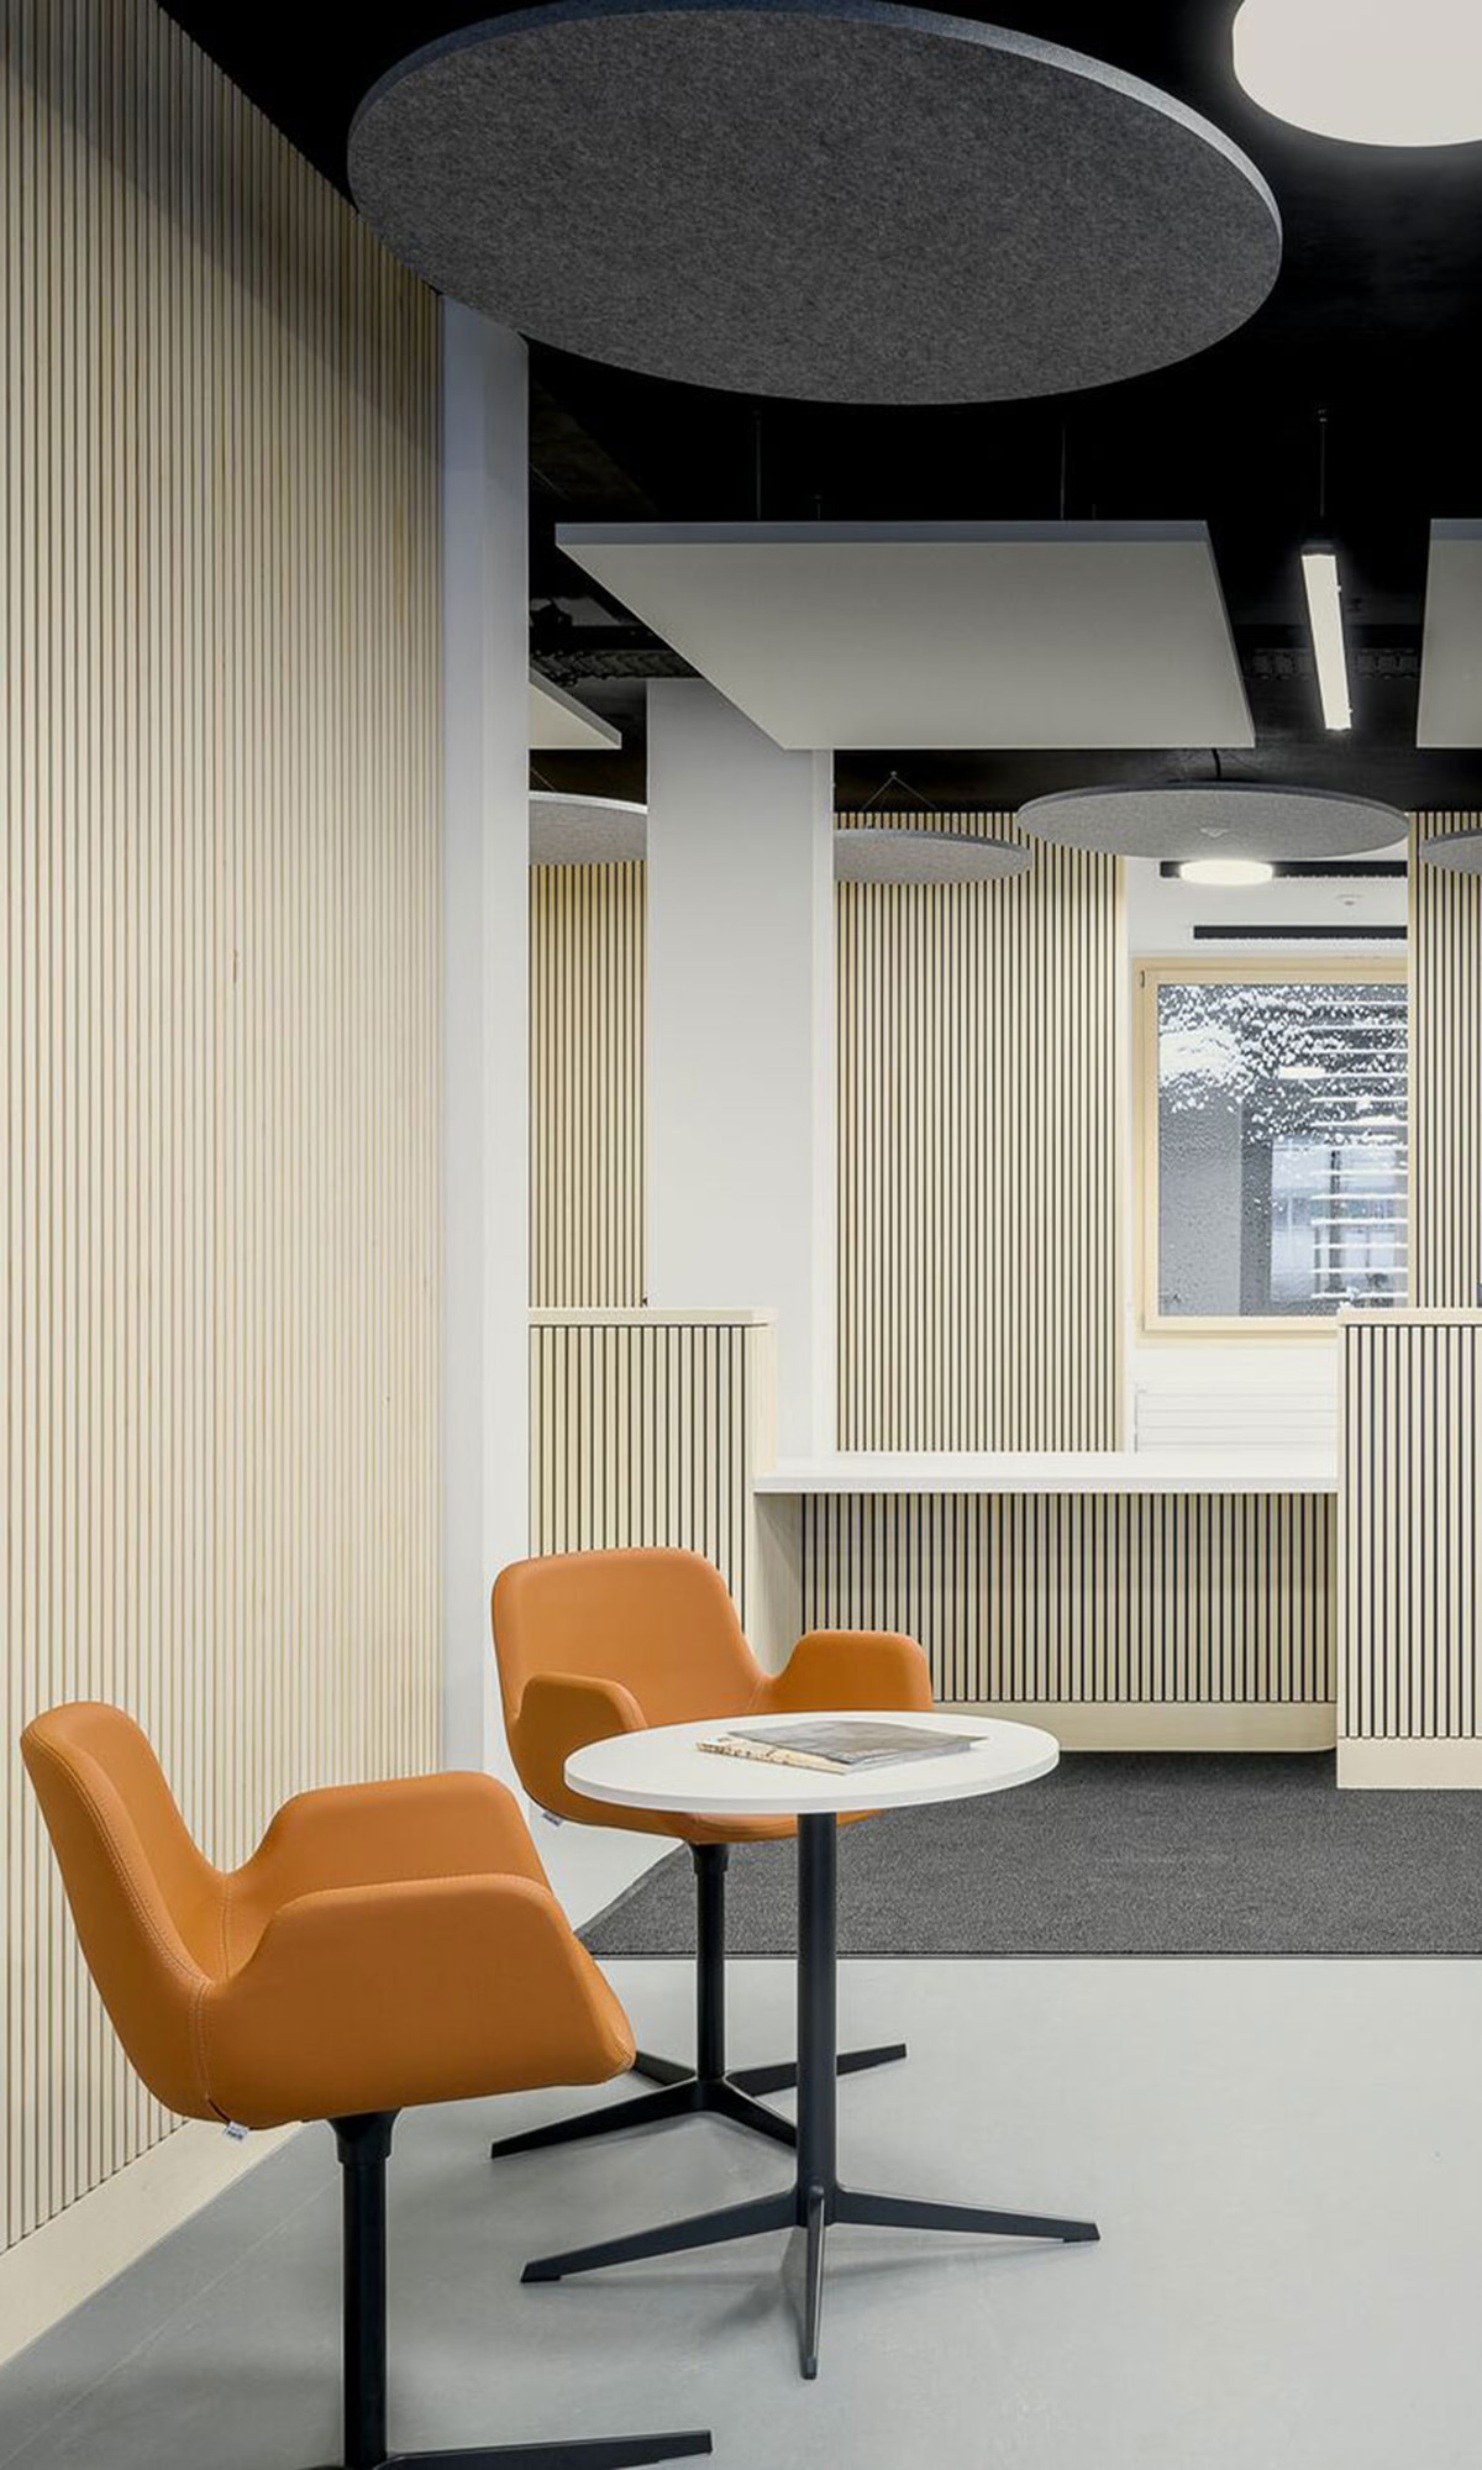 Waiting area with timber interior finishing in Mosnang health centre